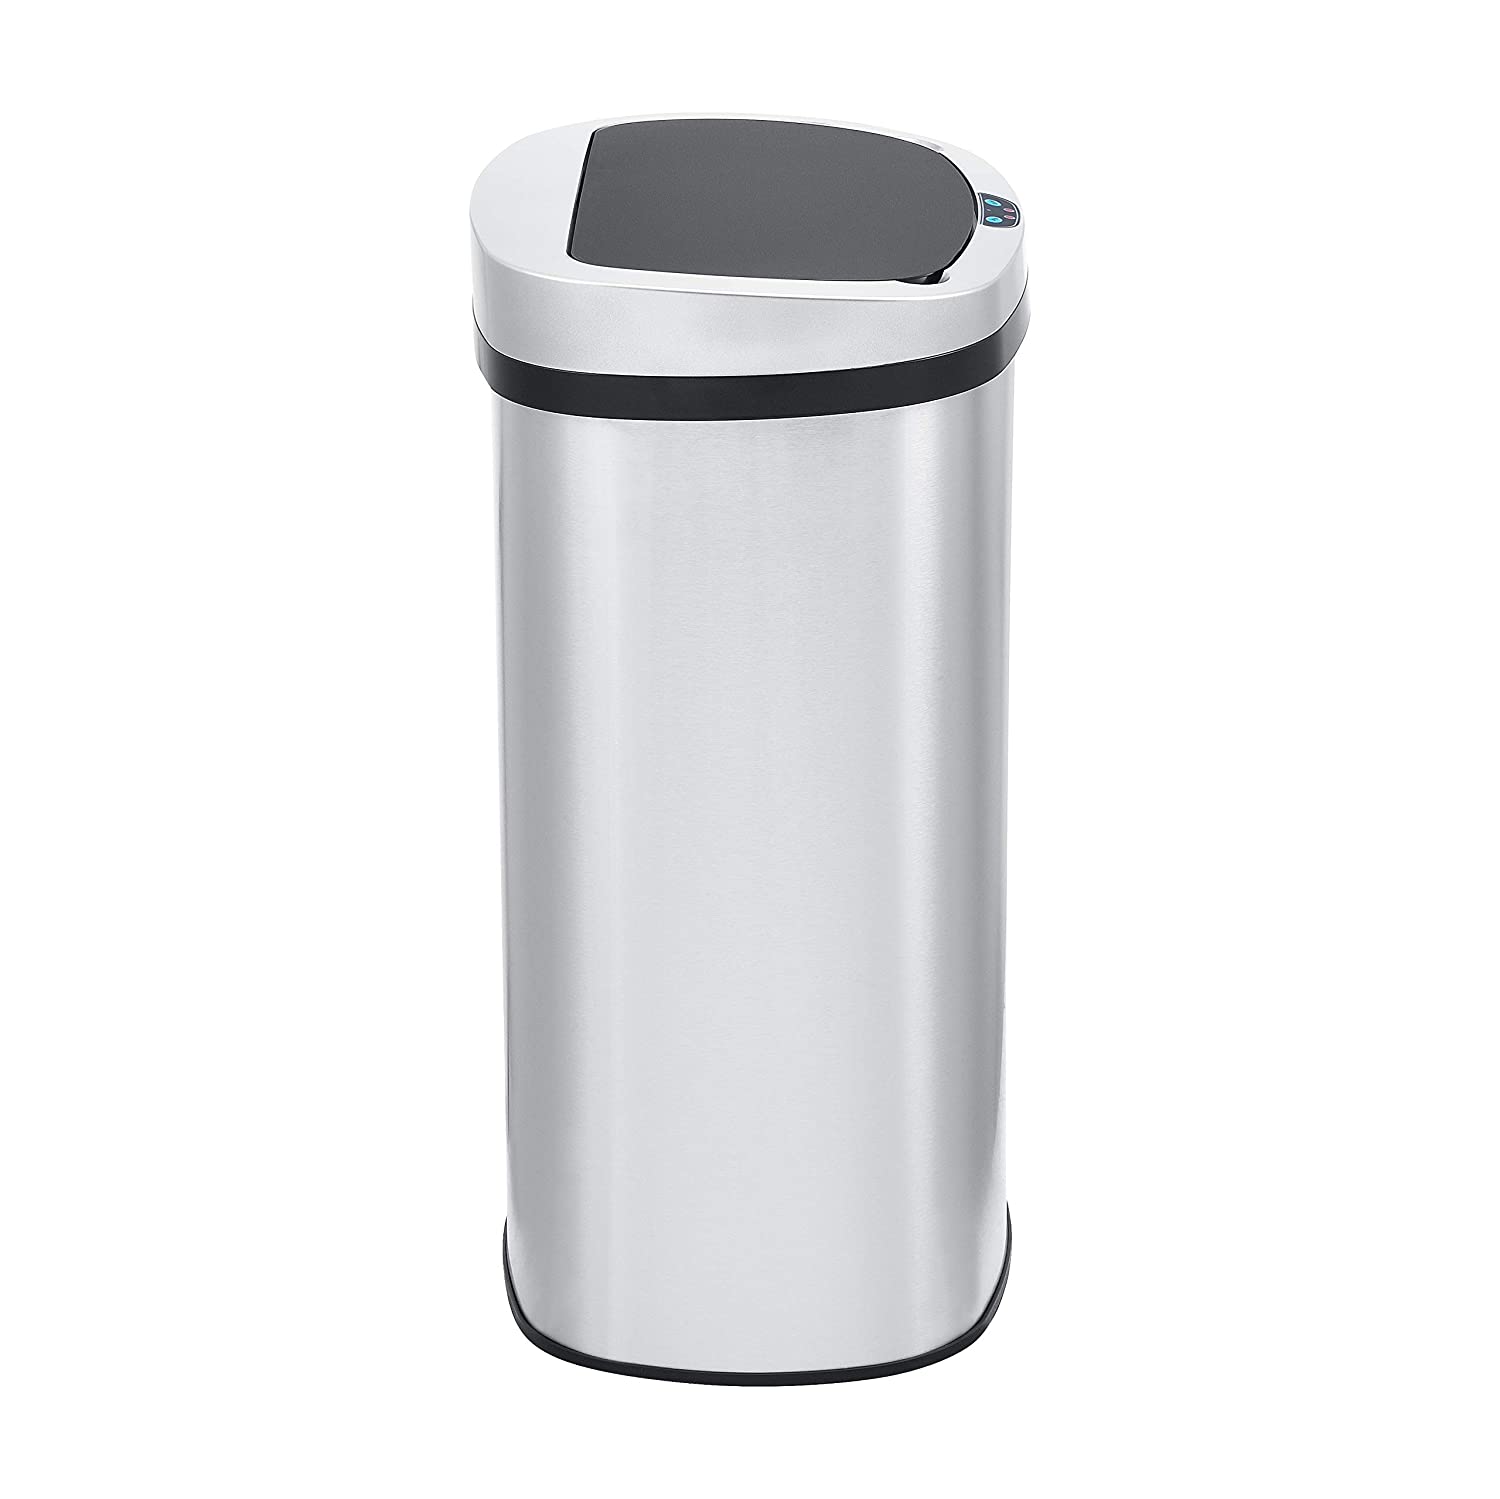 LC HOME 13 Gallons Steel Motion Sensor Trash Can & Reviews